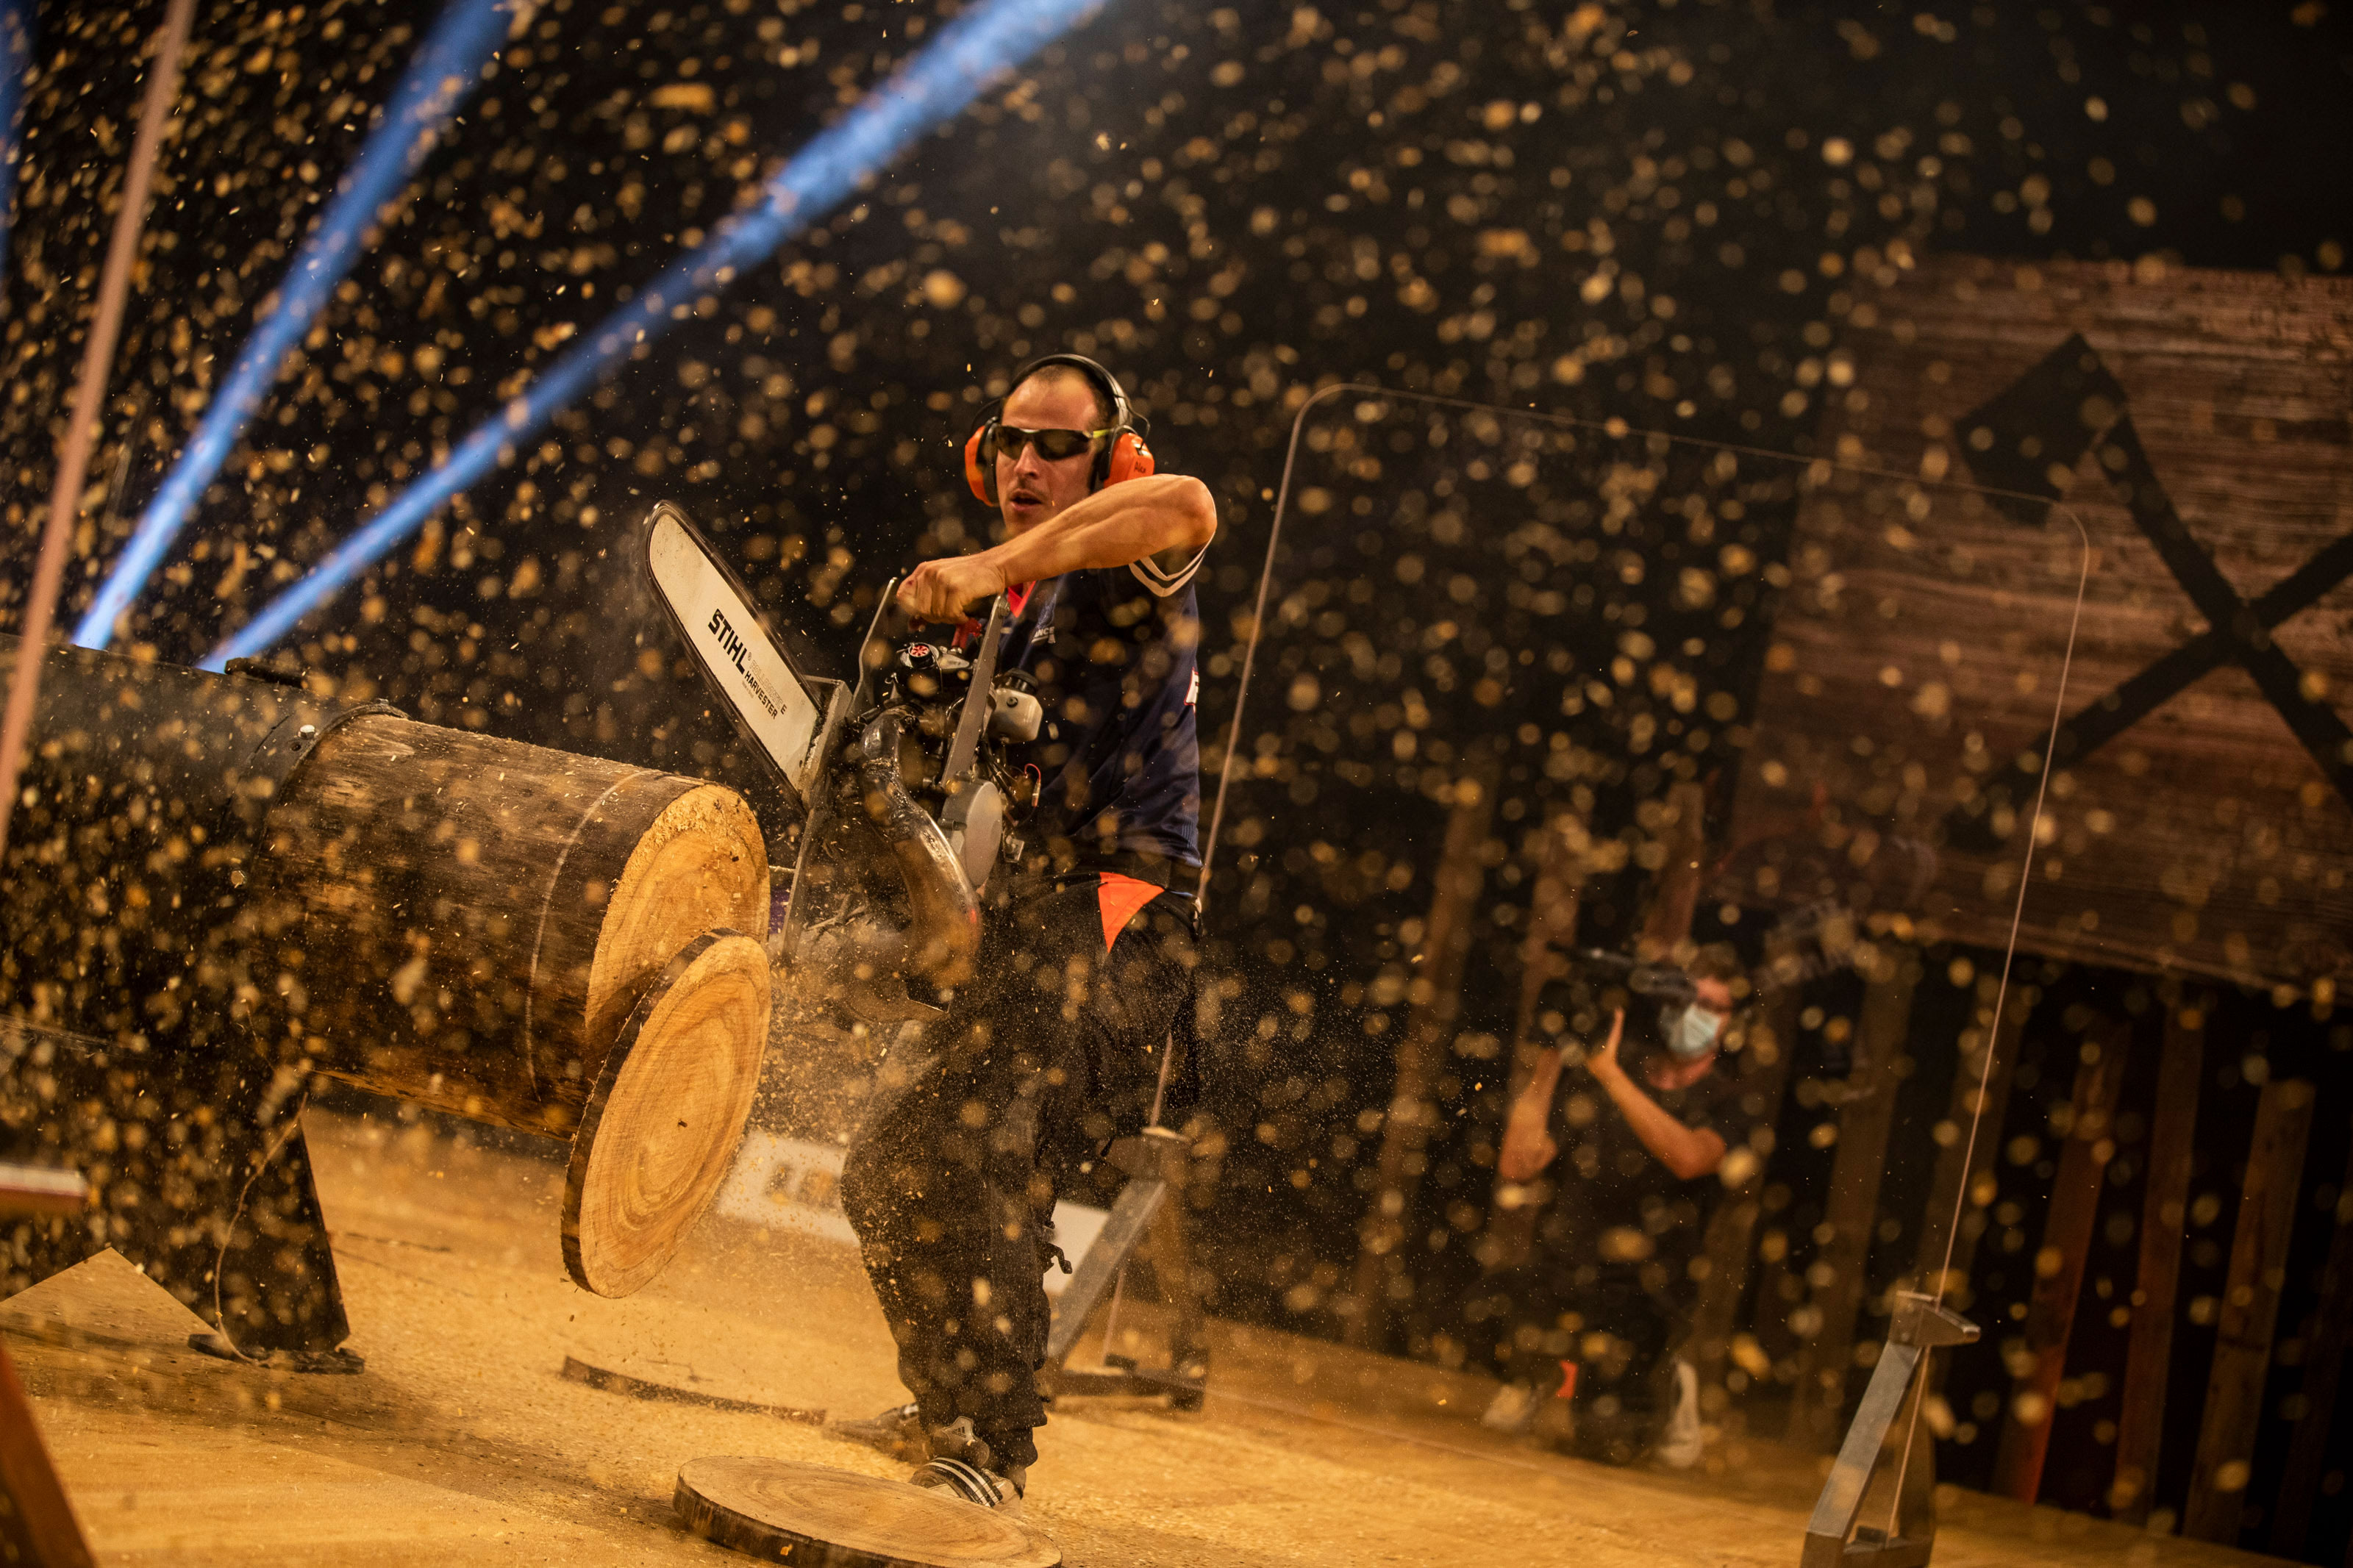 STIHL TIMBERSPORTS® athlete Guillaume Maure on the Hot Saw at the Four Nations Cup 2020 in Munich.